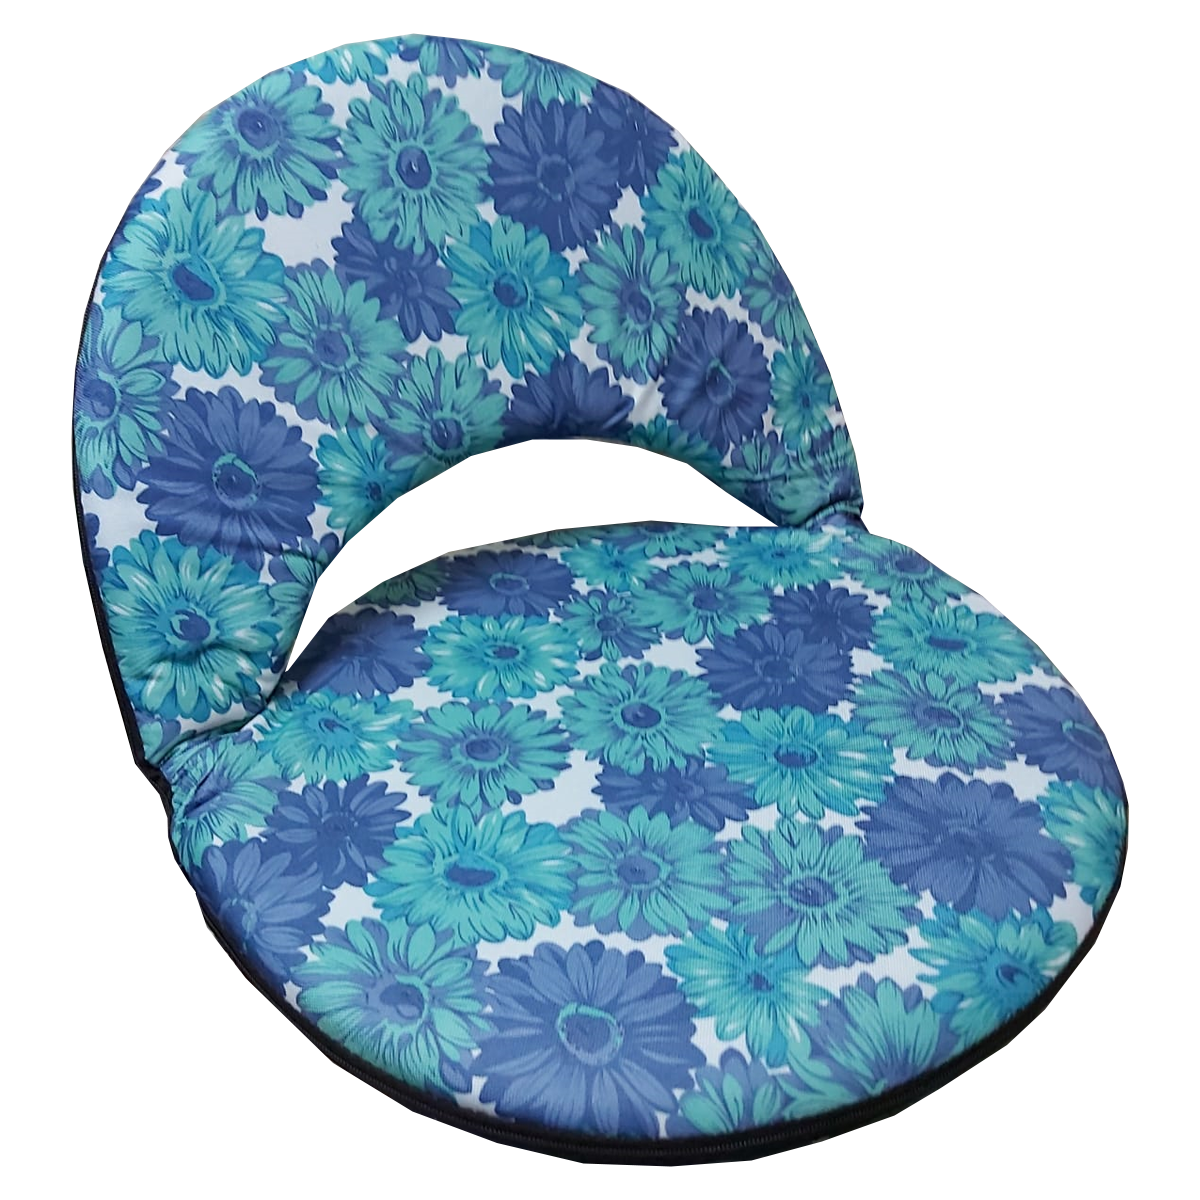 Foldable Floor Beach Camping Chair 5 Stage Adjustment (1 To 5 Adjustable angles) Floral Blue